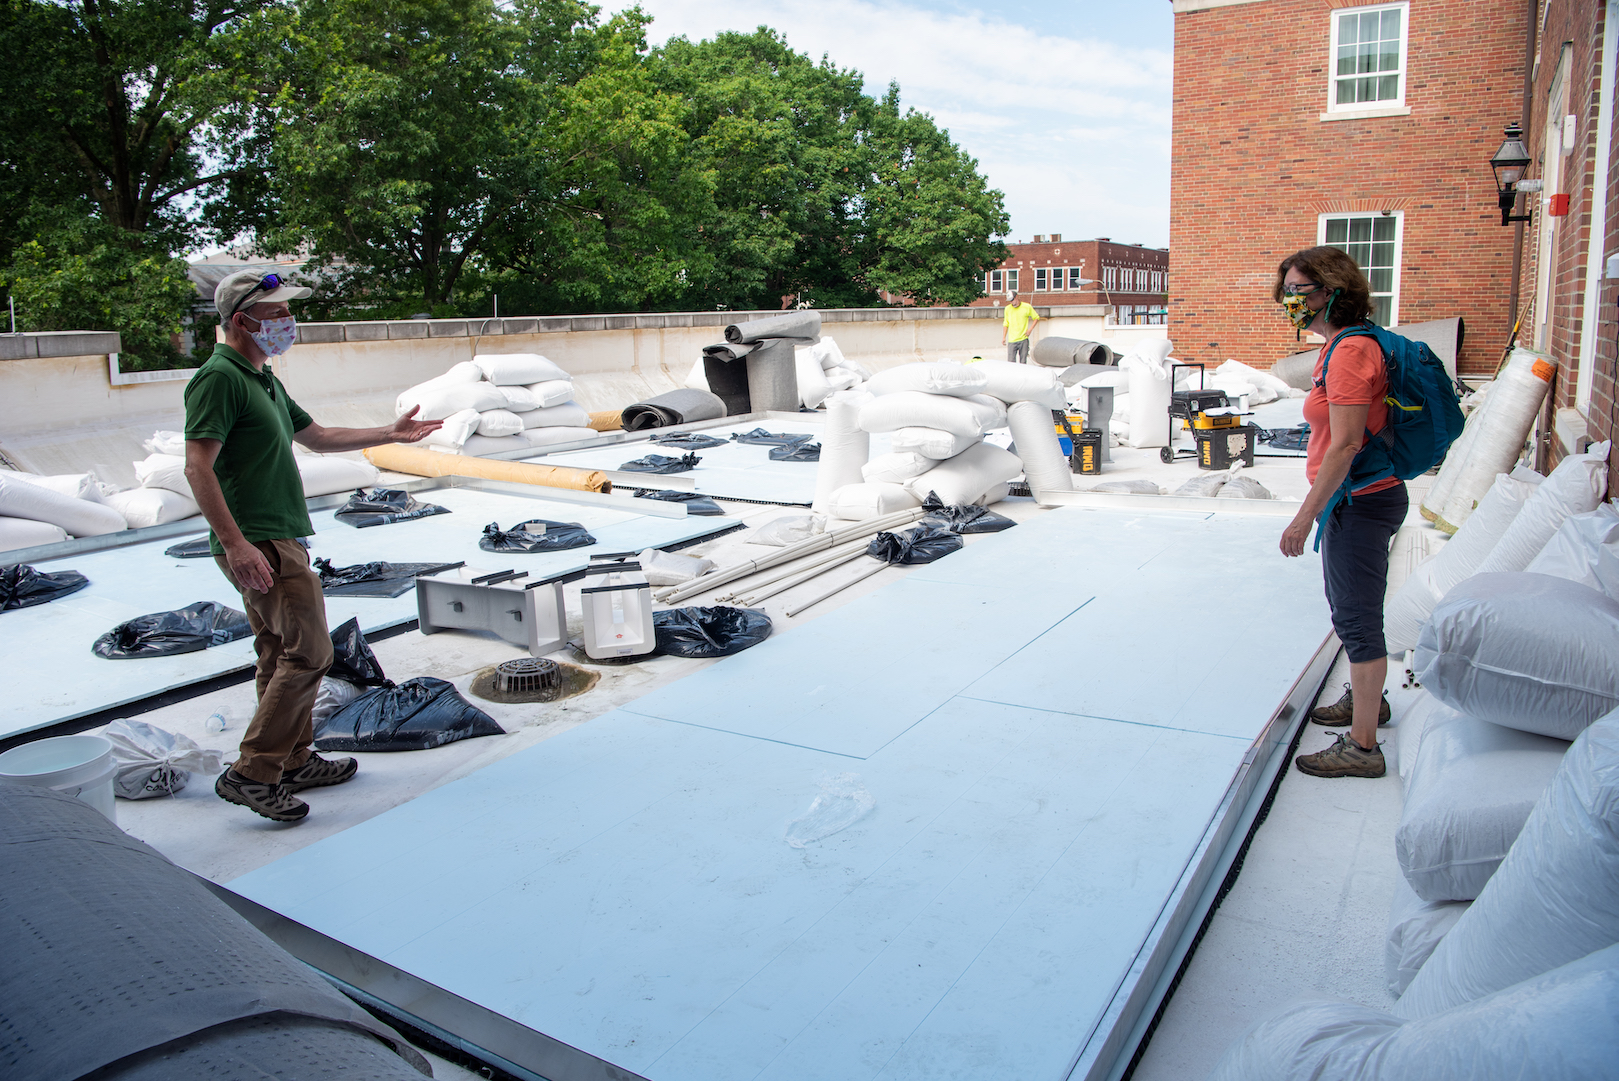 Drs. Rosenthal and Thompson overseeing construction on the new green roof